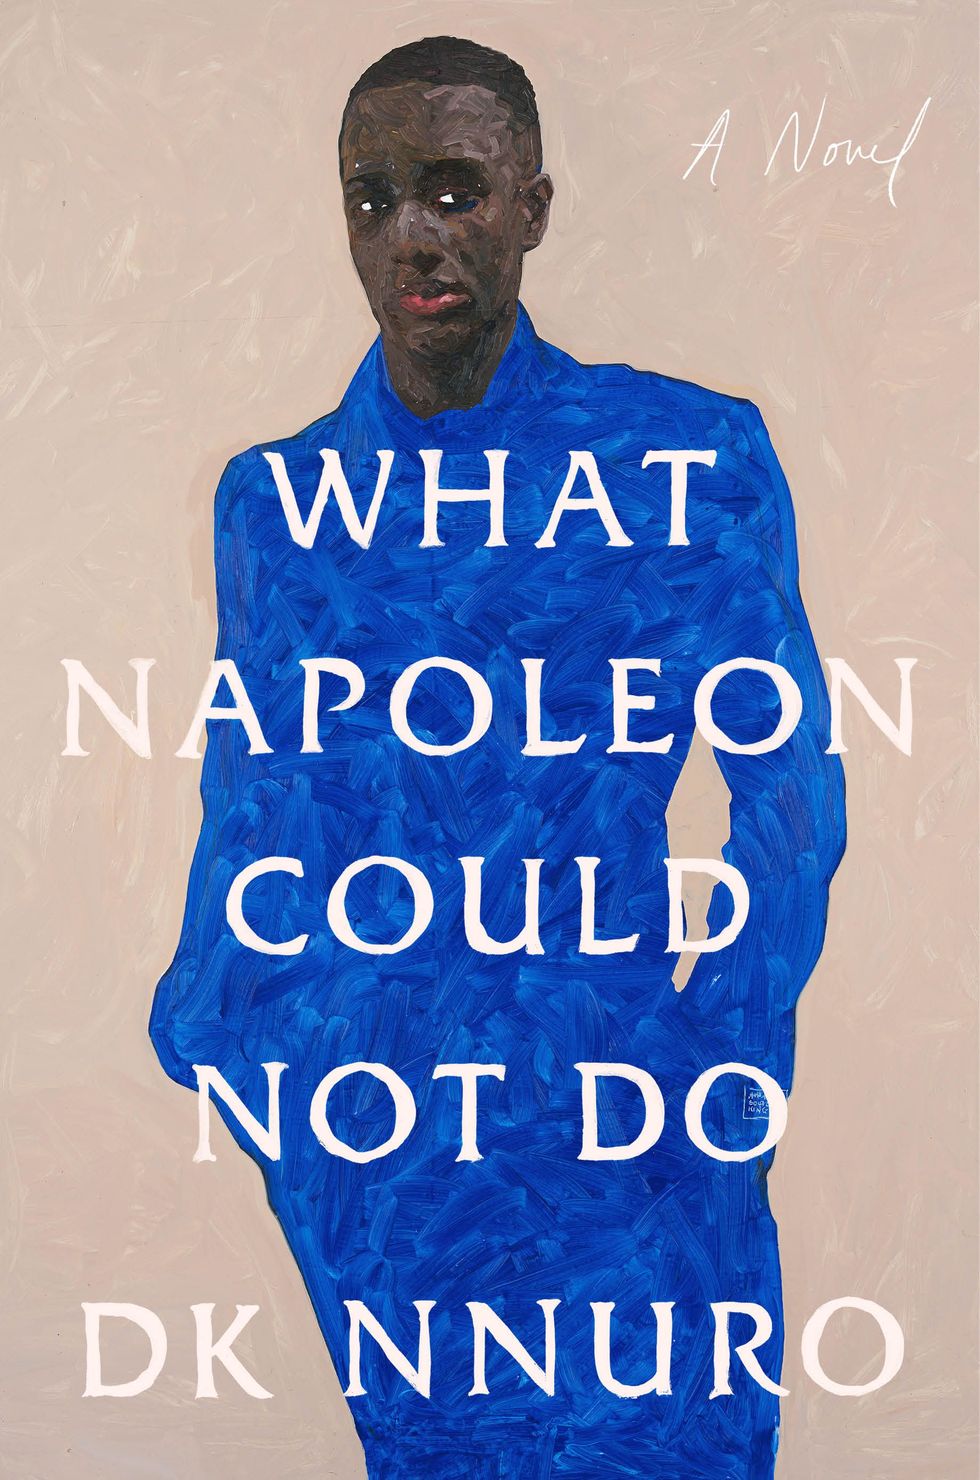 <i>What Napoleon Could Not Do</i> by DK Nnuro